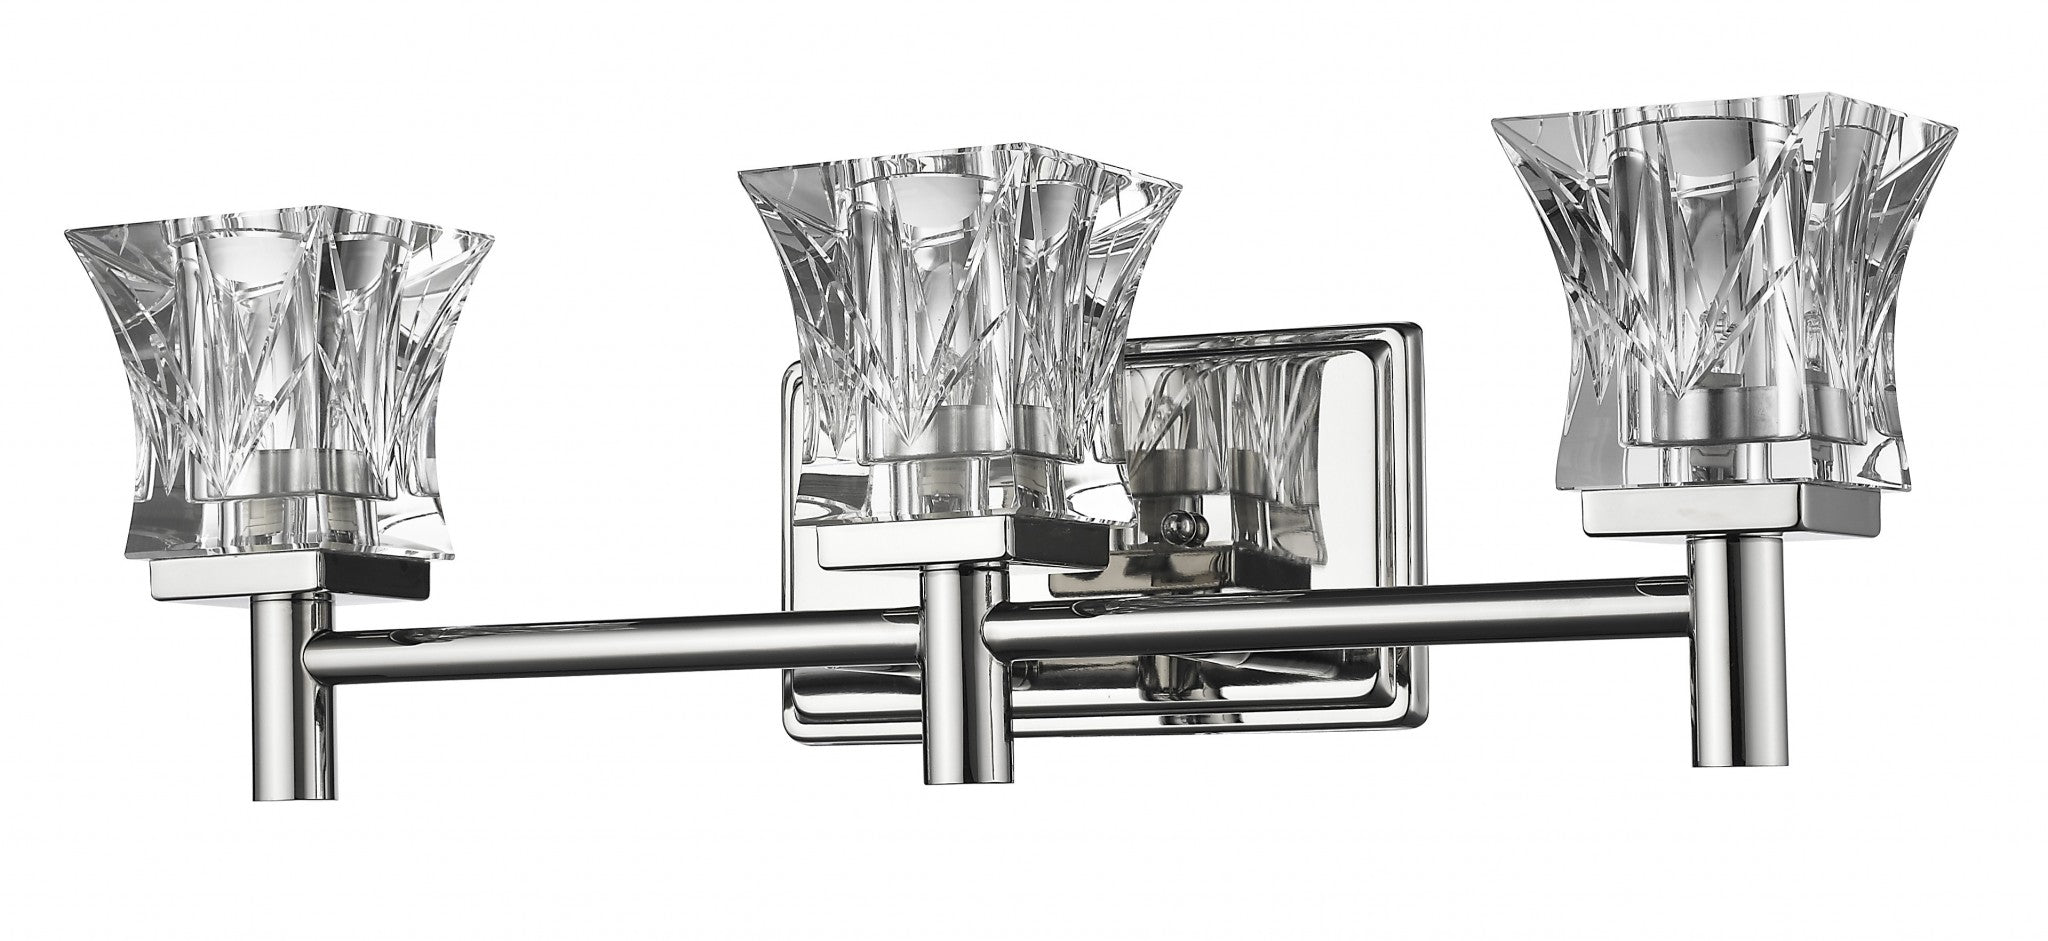 Arabella 3-Light Polished Nickel Sconce With Pressed Crystal Shades